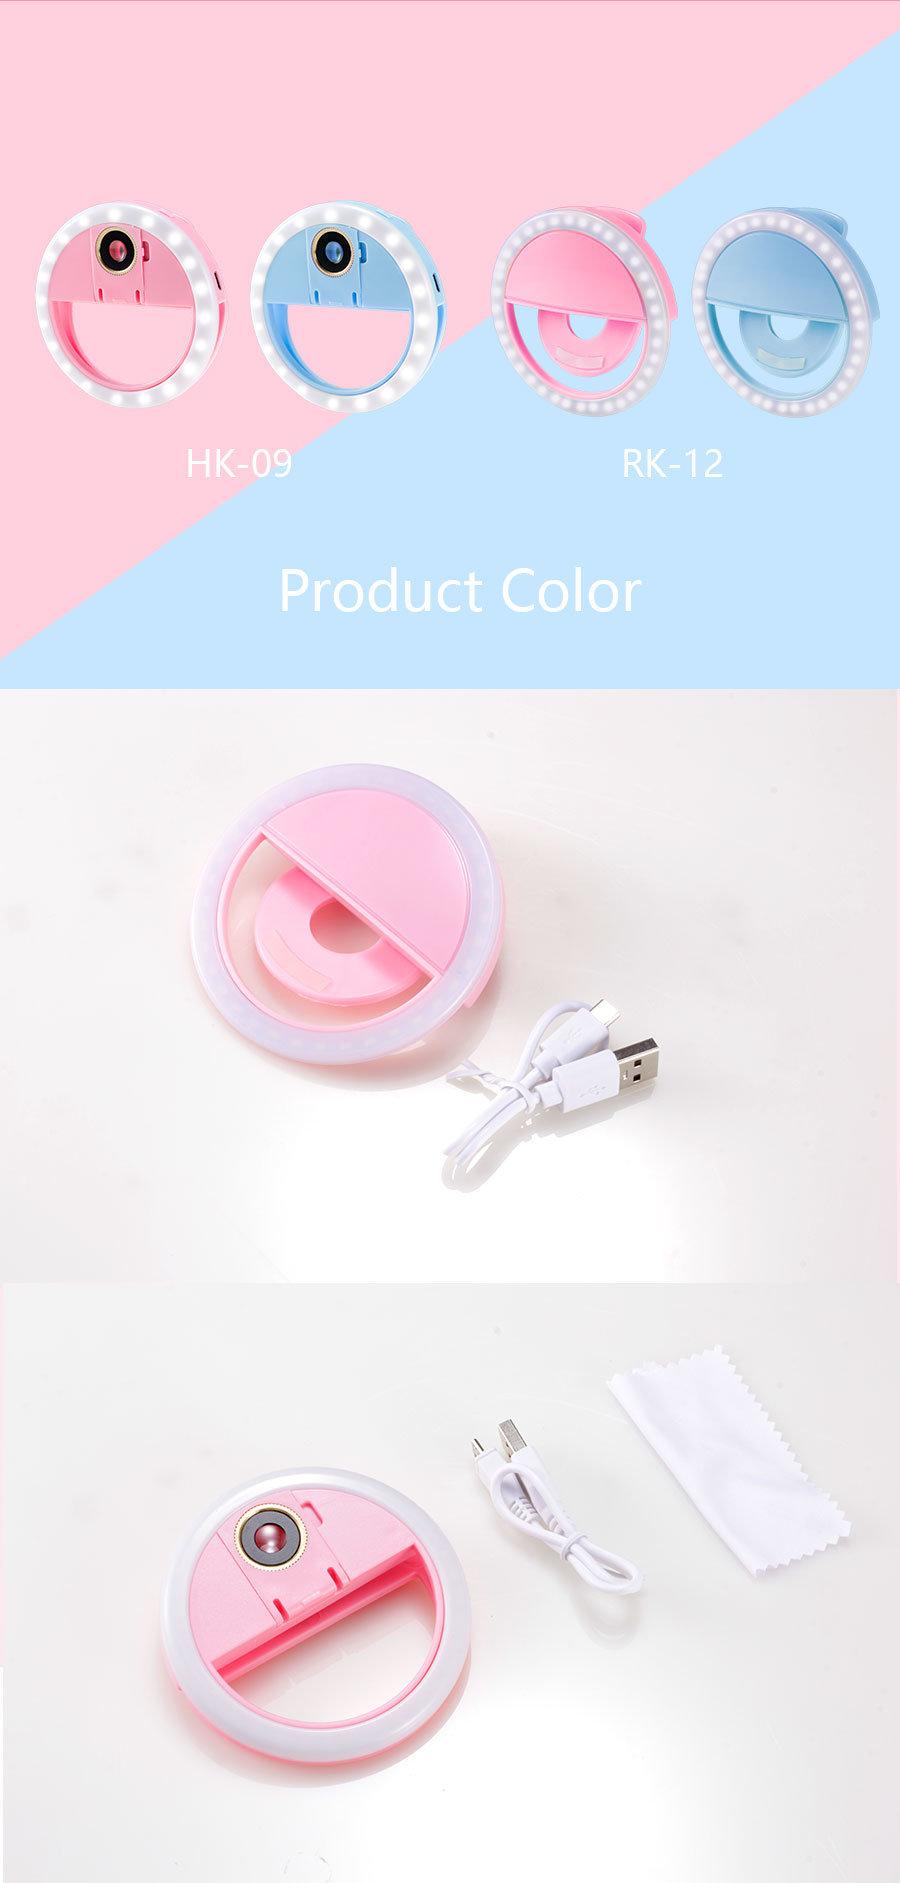 Portable USB Charging LED Phone Rechargeable Fill Selfie Ring Light Hot Sale Products